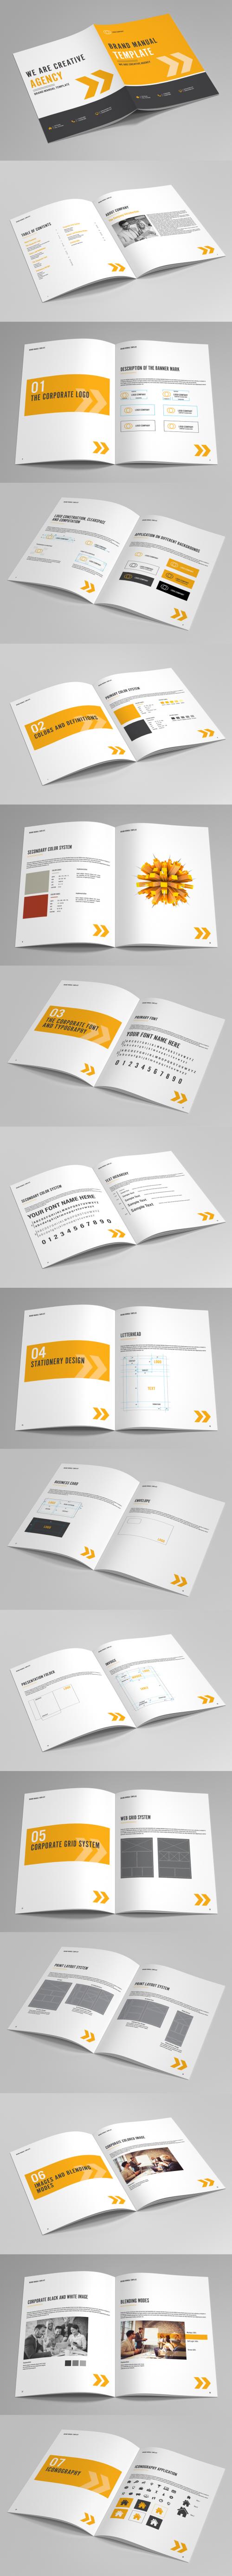 Brand Manual Layout with Orange Accents 1 - 194043423